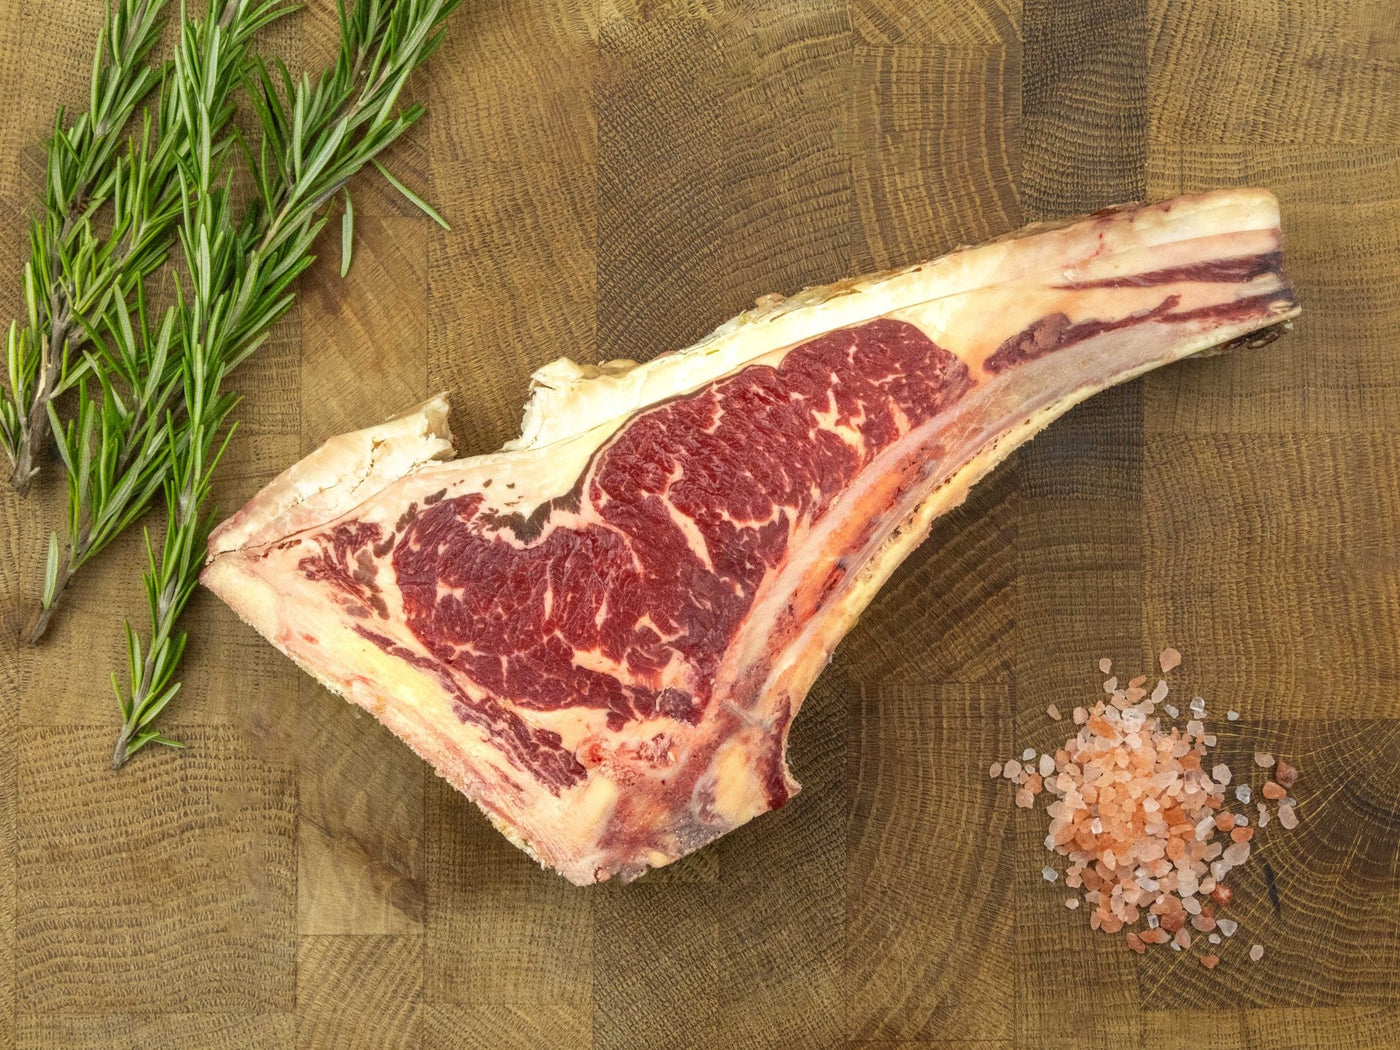 Dry-Aged Galician Bone In Sirloin - Beef - Thomas Joseph Butchery - Ethical Dry-Aged Meat The Best Steak UK Thomas Joseph Butchery